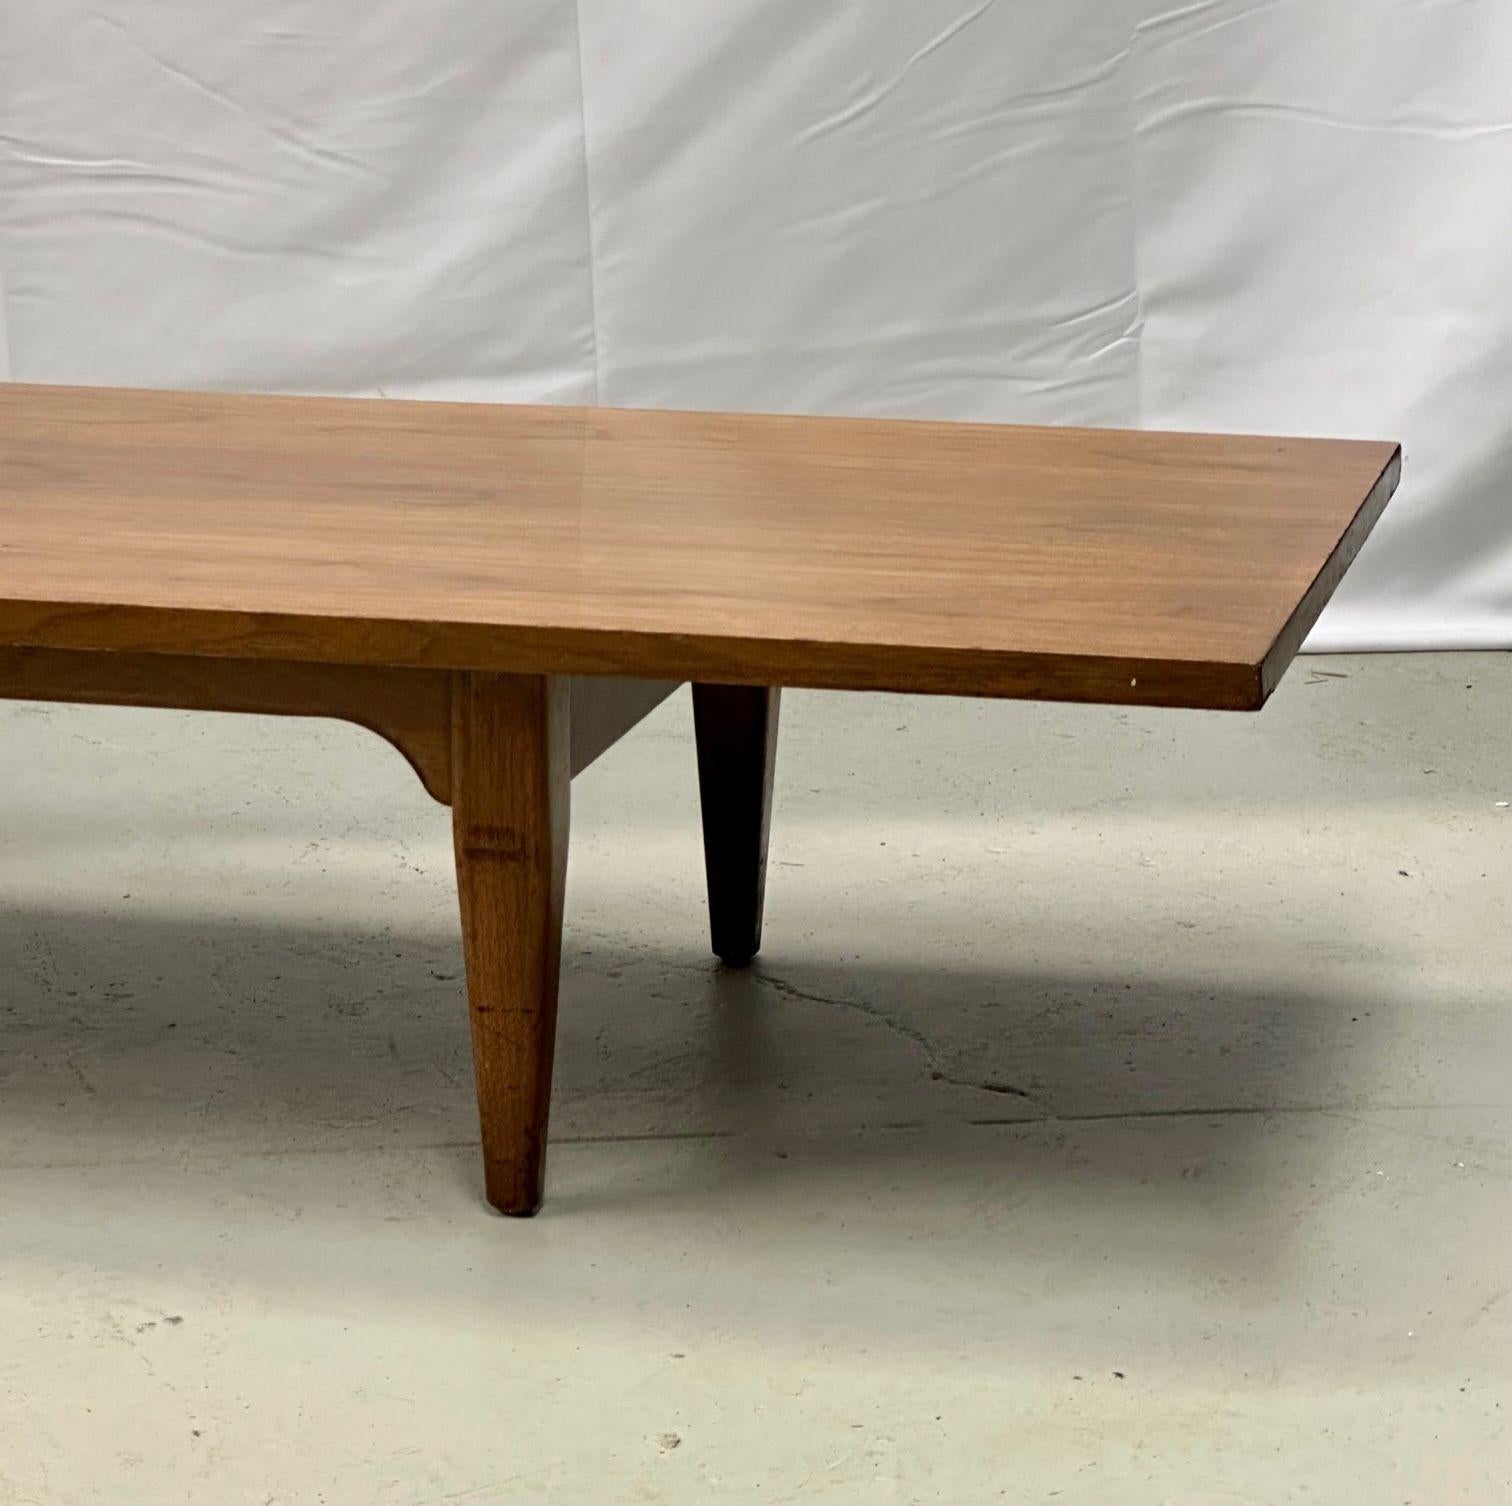 Danish Mid-Century Modern Cocktail or Coffee Table, 1950s, Solid Teak For Sale 2